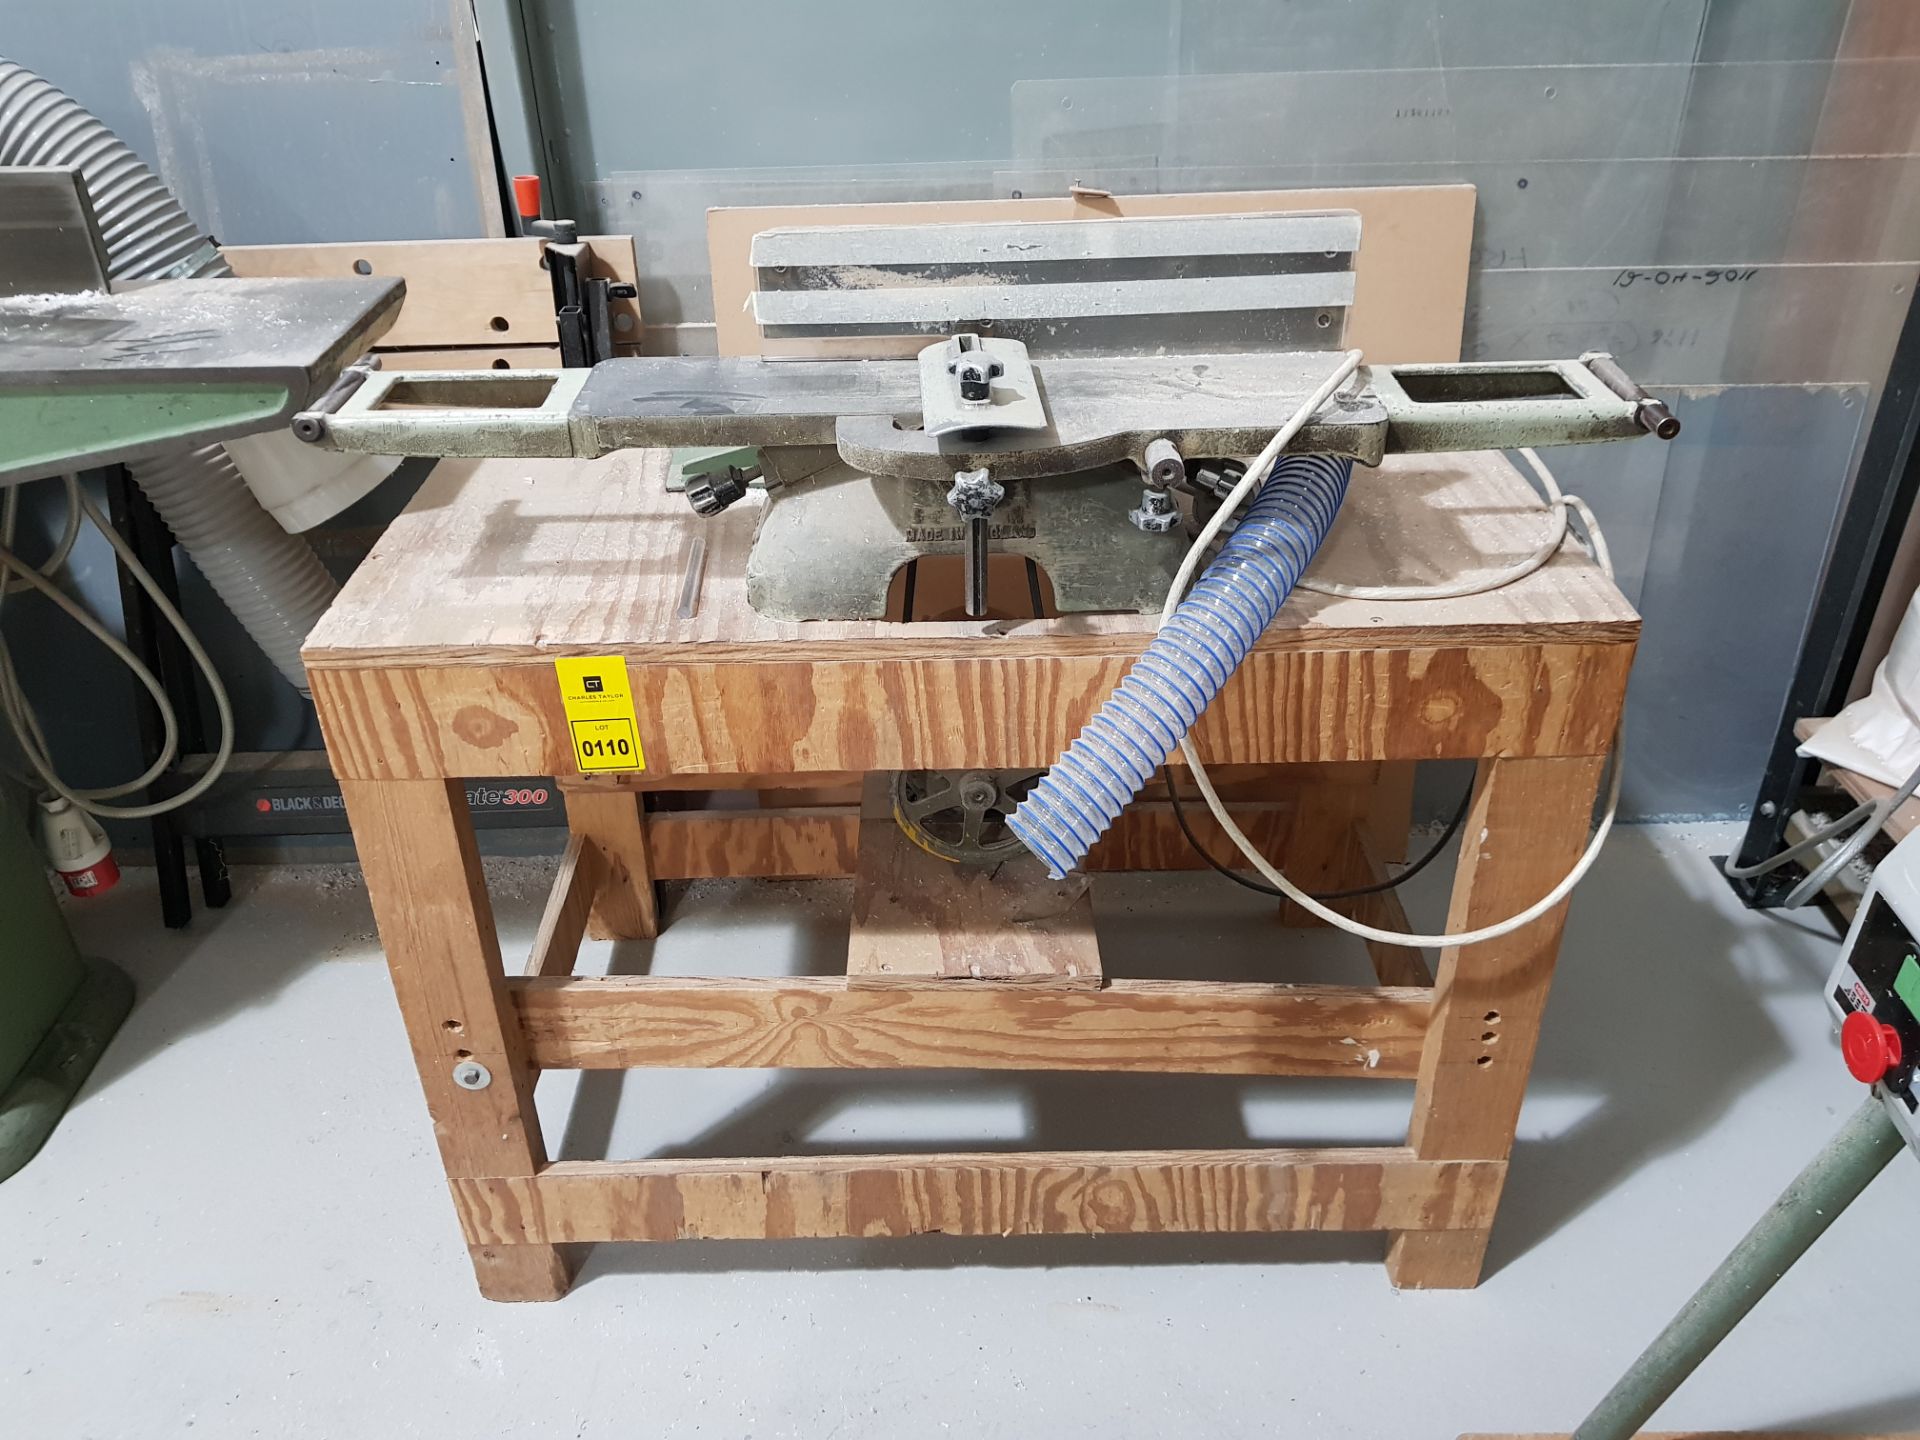 MYFORD ADJUSTABLE ENGINEERING PLANER AND STAND (ASSETS LOCATED IN DENTON, MANCHESTER. VIEWING